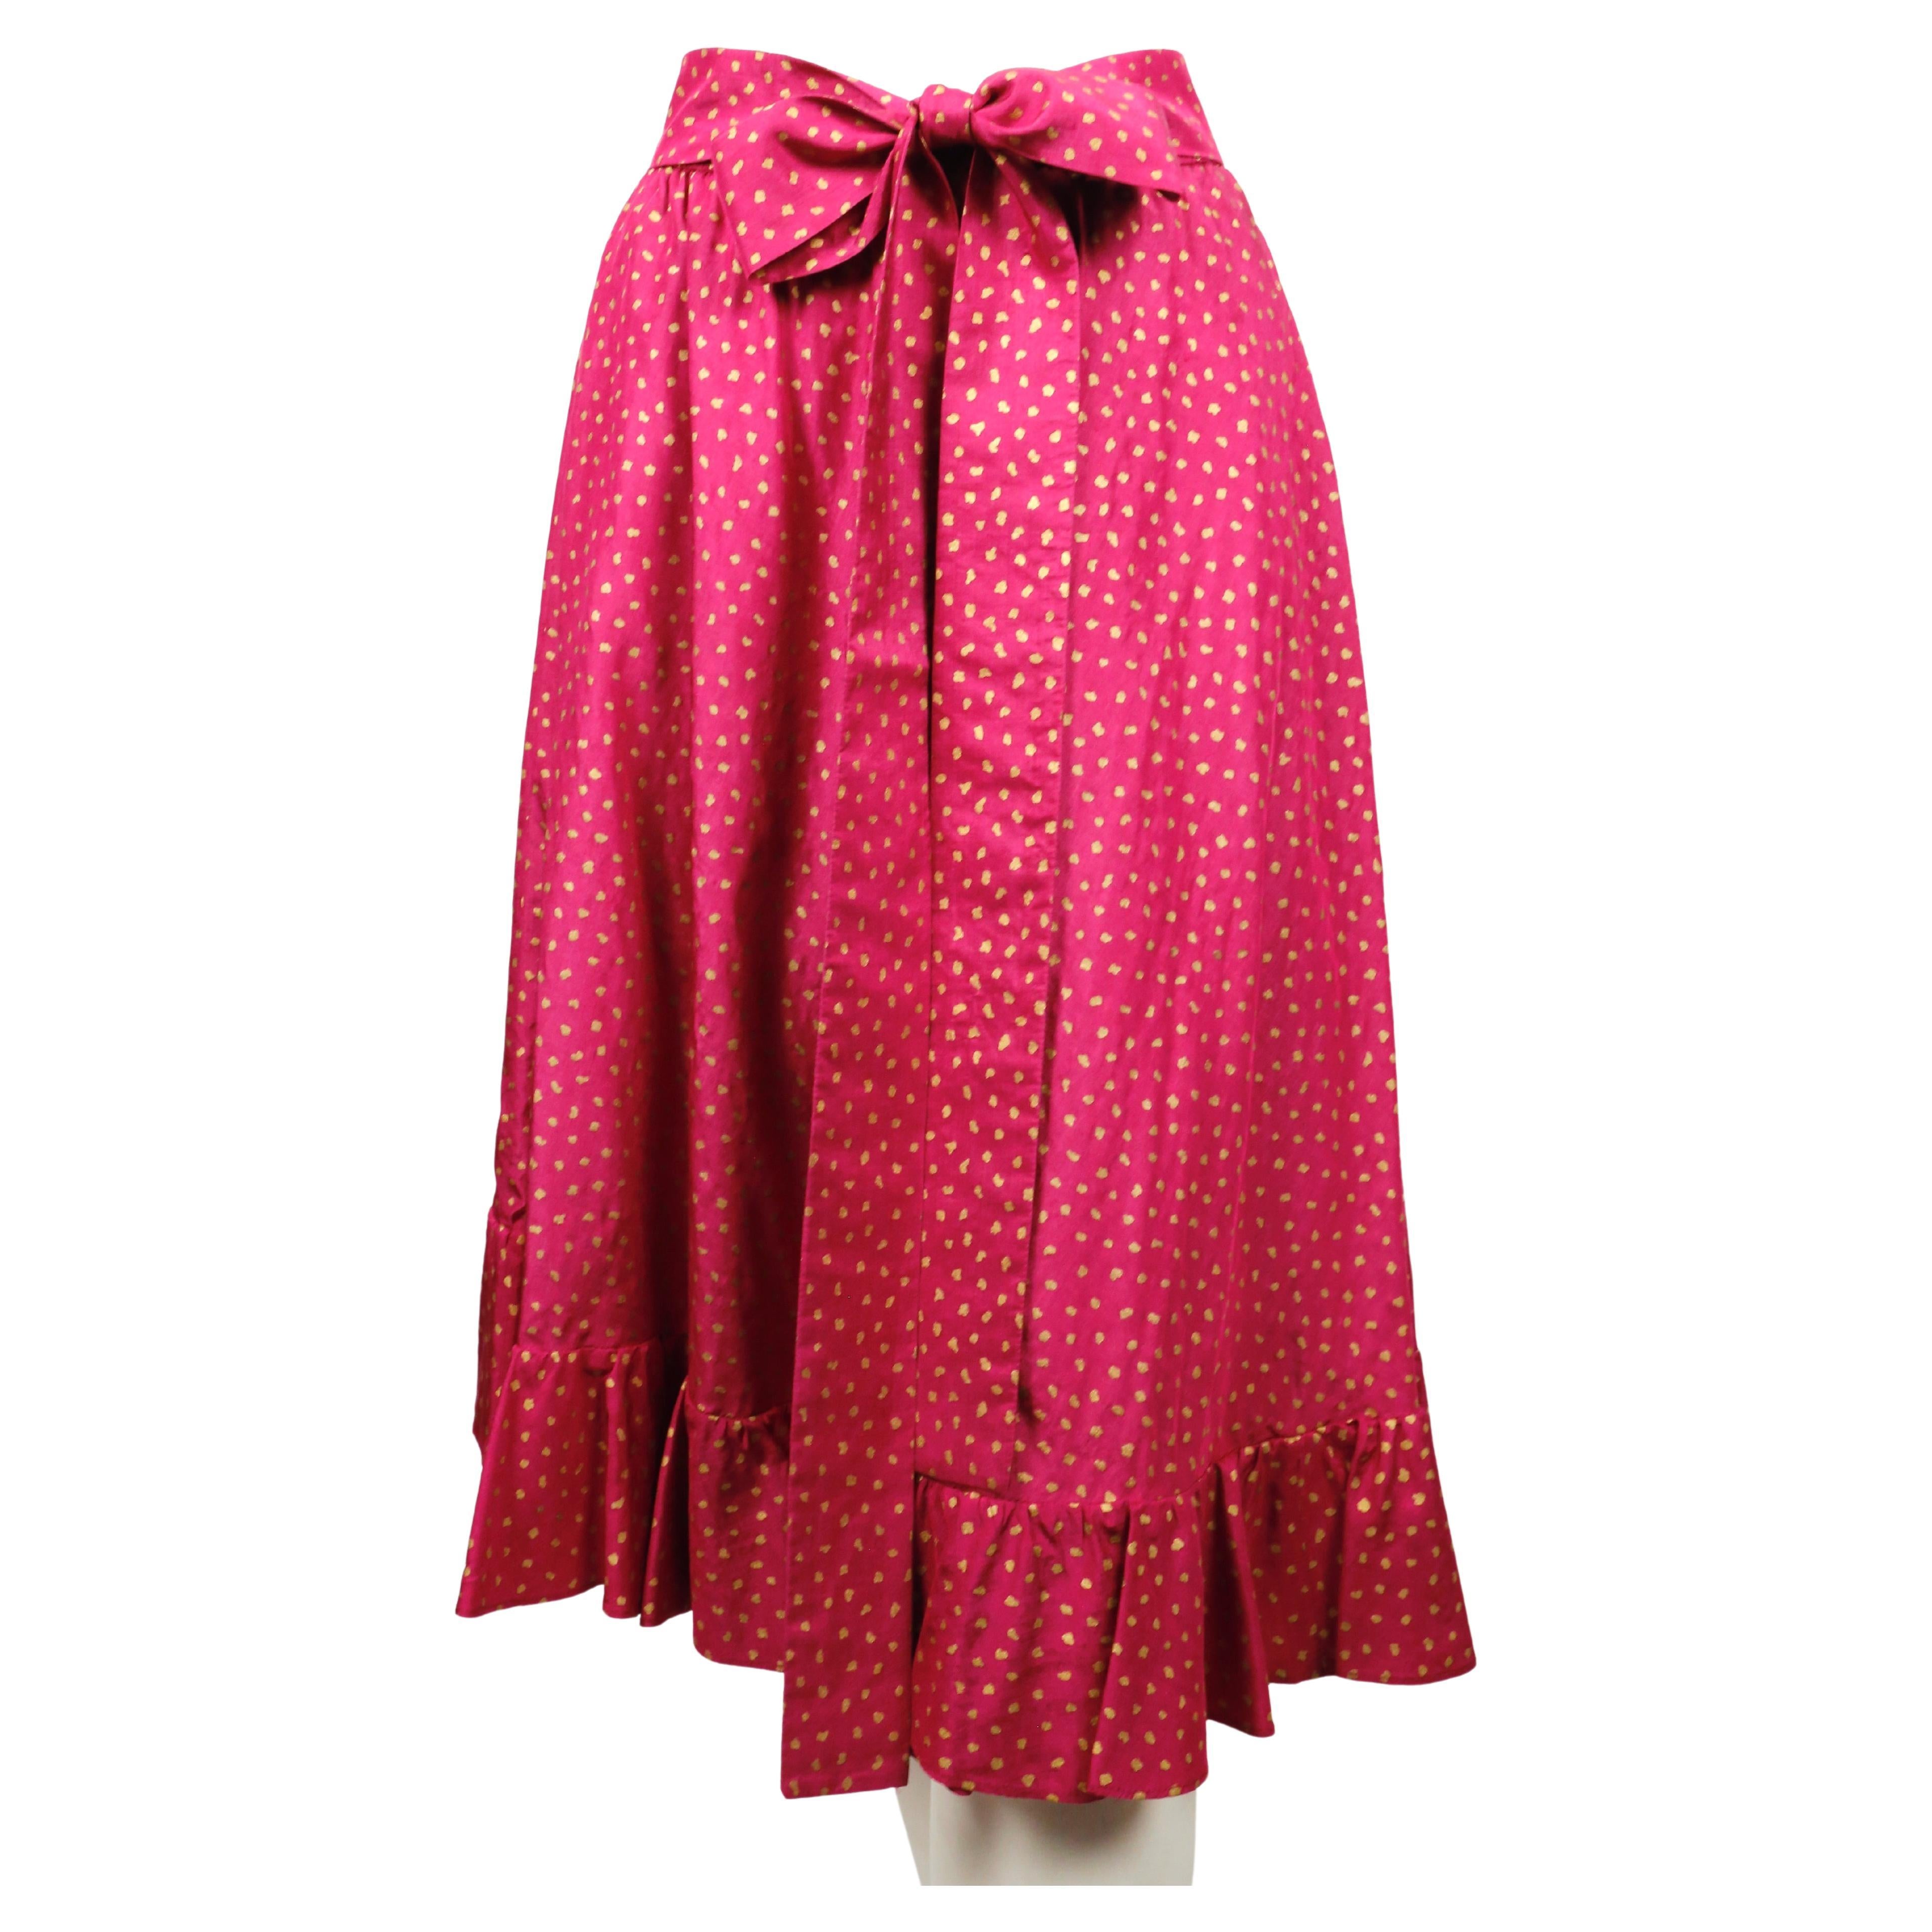  Fuchsia and gold silk skirt with ruffled hem and long belt designed by Yves Saint Laurent dating to the late 1970's. French size 36 however this also easily fit a French 38 or 40. Approximate measurements: waist (unstretched) 23